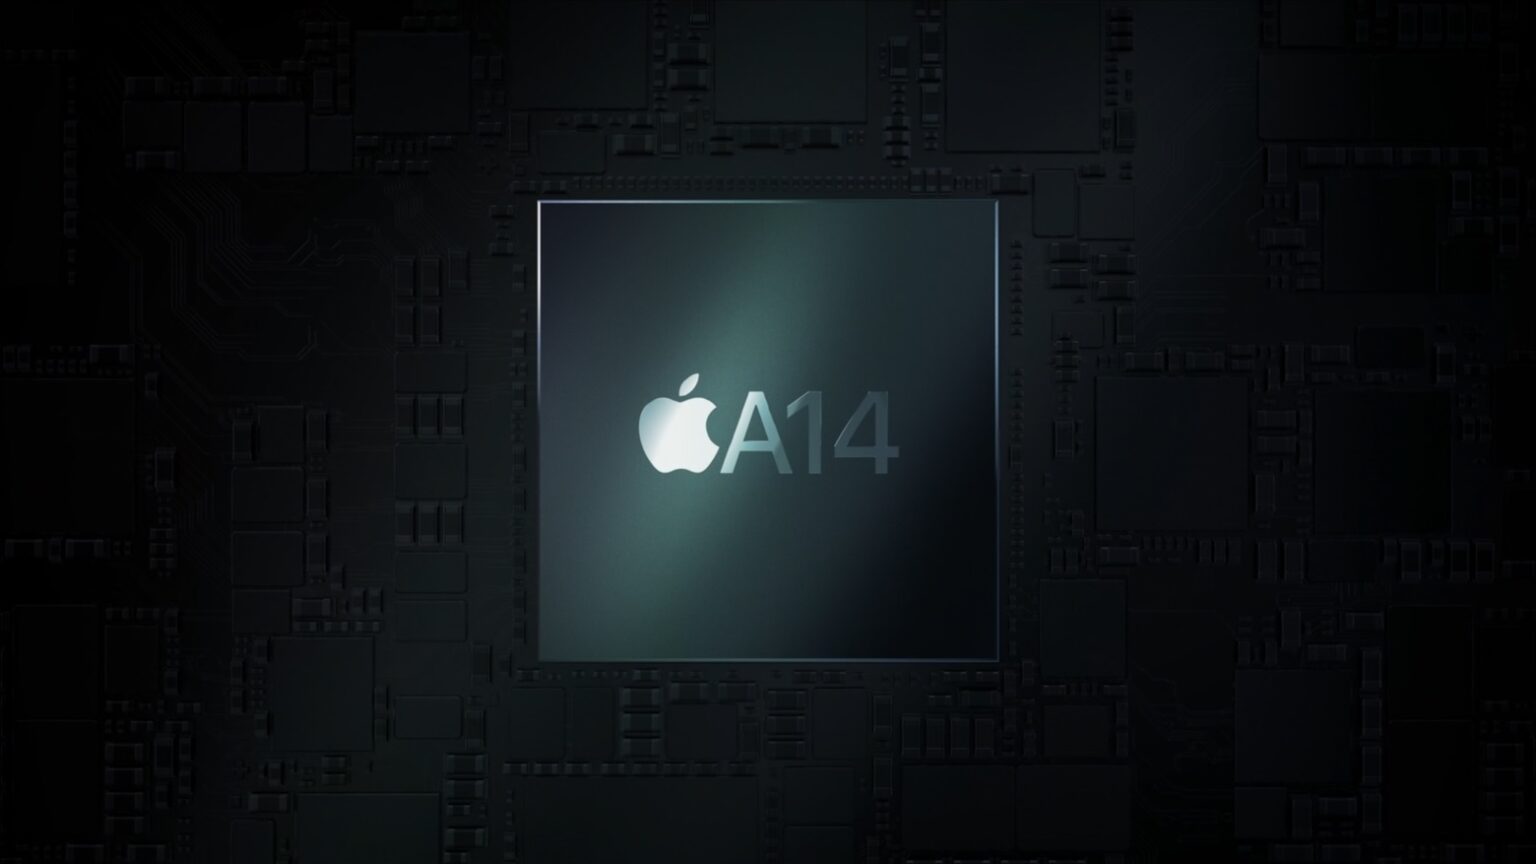 Apple A14 is made with an amazing 5nm production process.